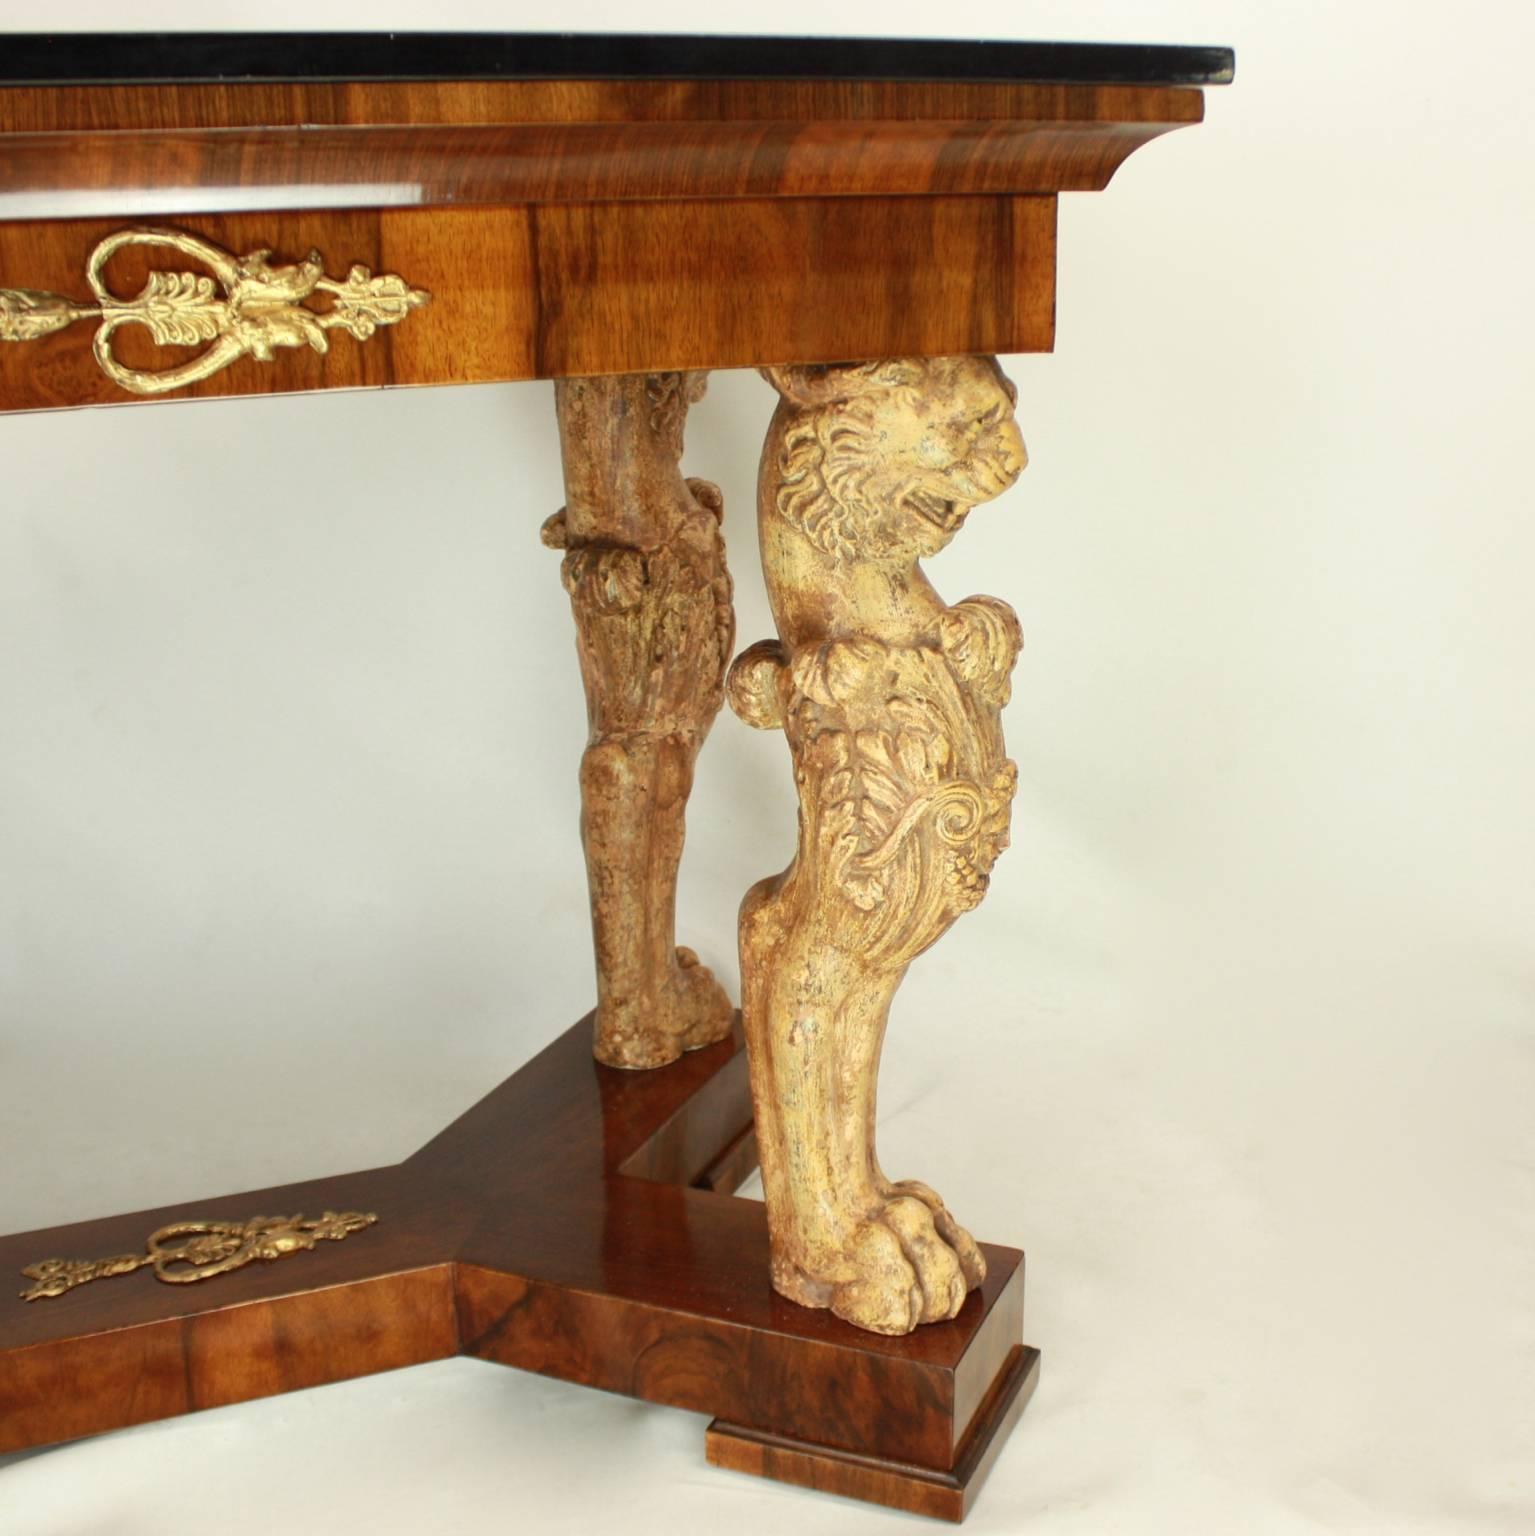 A North Italian center table or console table with a very large and rare multi-figure Scagliola top possibly manufactured in the workshop of Domenico Guattini / Reggio Emilia. The scagliola top depicts cartouches with Venetian galleys, dated 1721,